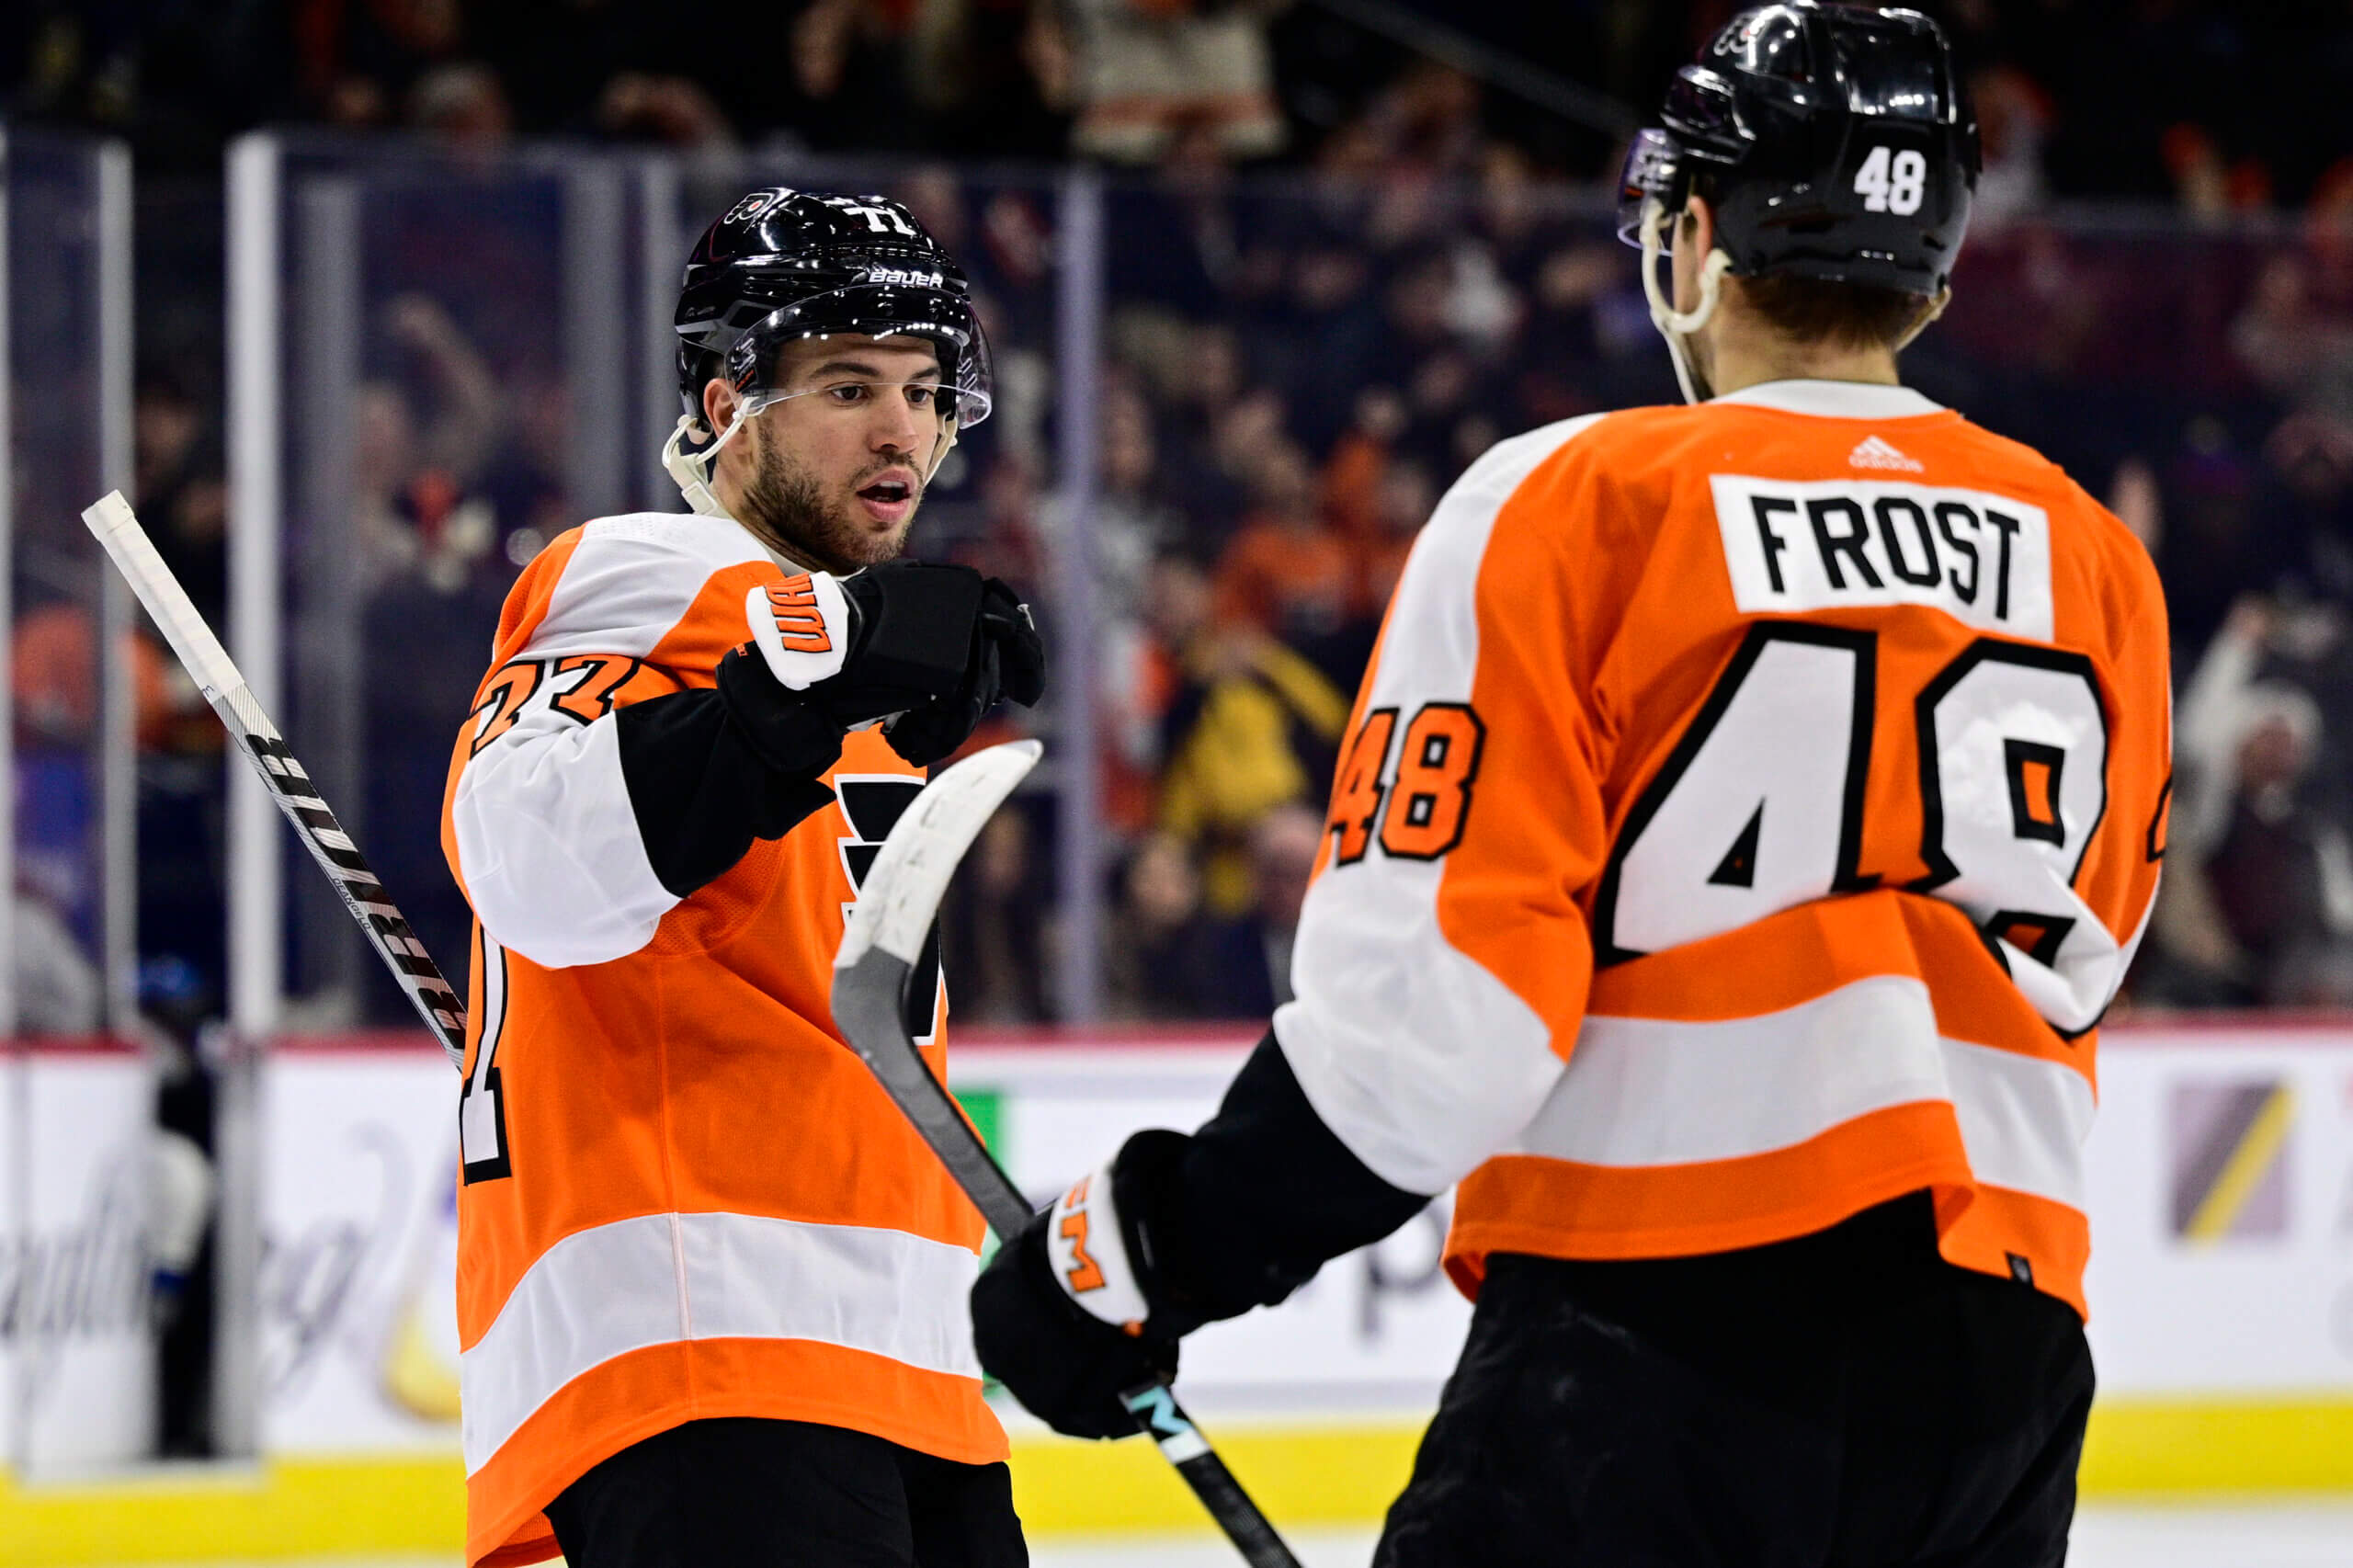 Konecny leads Flyers past Devils 3-1 with goal, assist